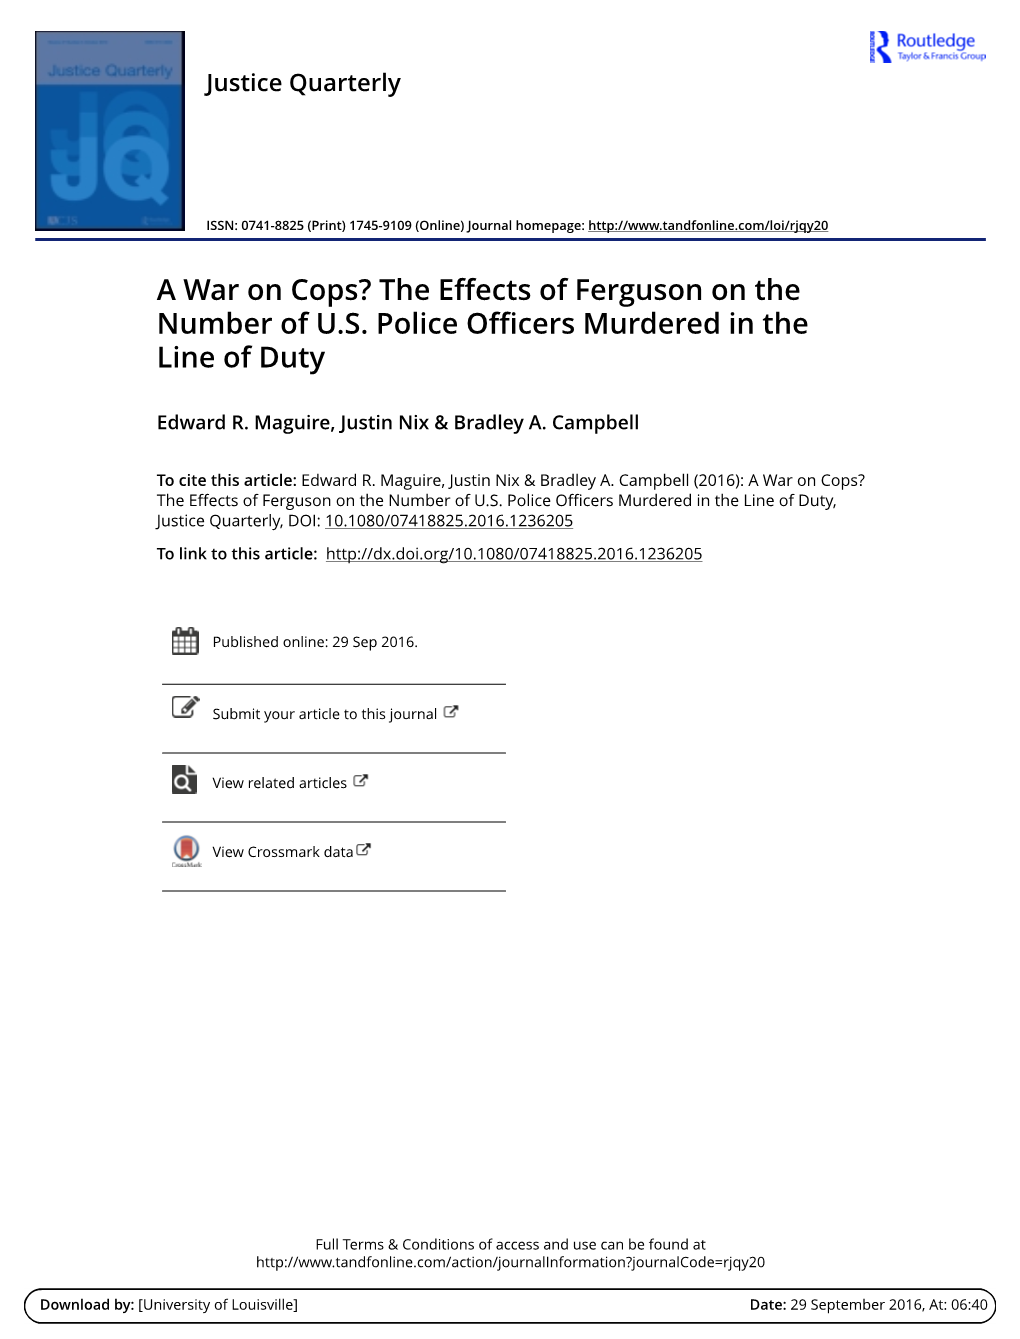 A War on Cops? the Effects of Ferguson on the Number of U.S. Police Officers Murdered in the Line of Duty